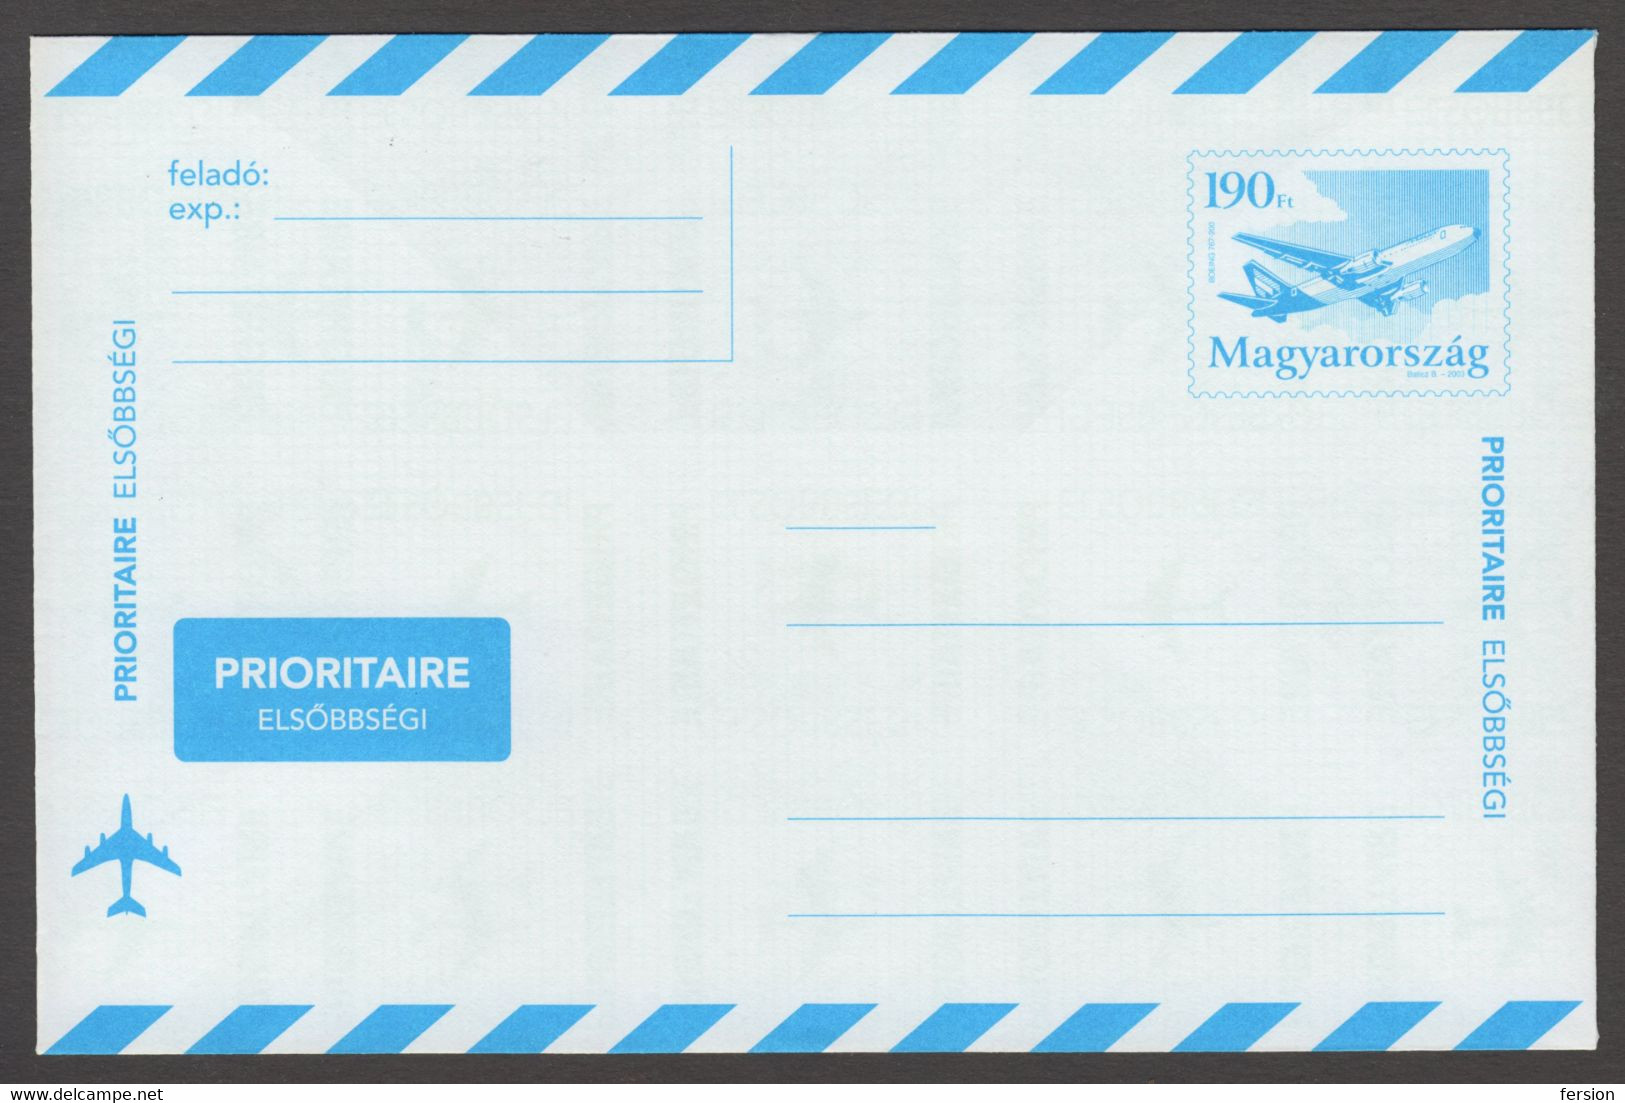 BOEING 737 MALÉV Airplane Airliner 2003 Hungary AIR MAIL PAR AVION Postal Stationery 190 Ft Cover Letter Envelope - Lettres & Documents